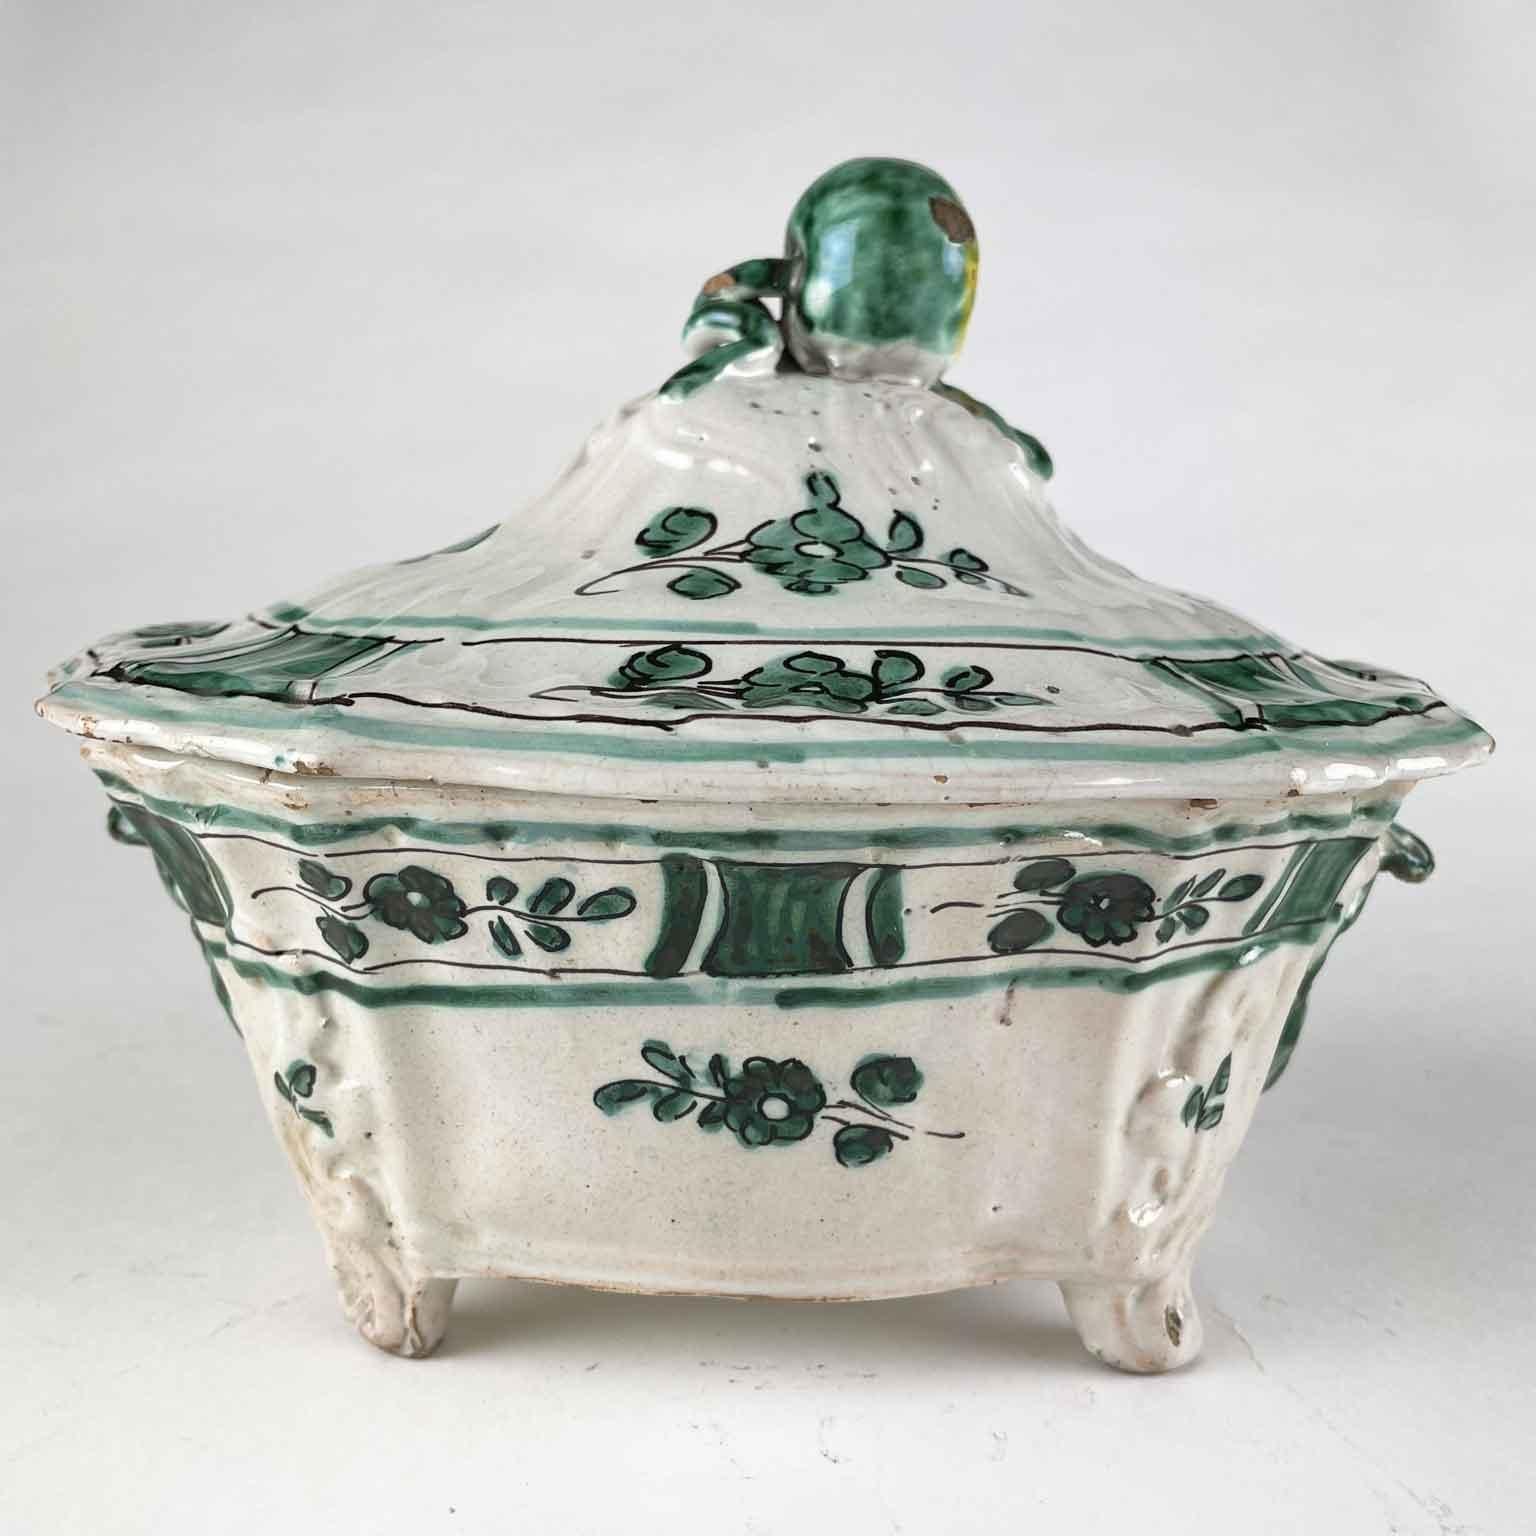 Hand-Painted 18th Century Italian Majolica Tureen with Cover by Cerreto Sannita Manufacture